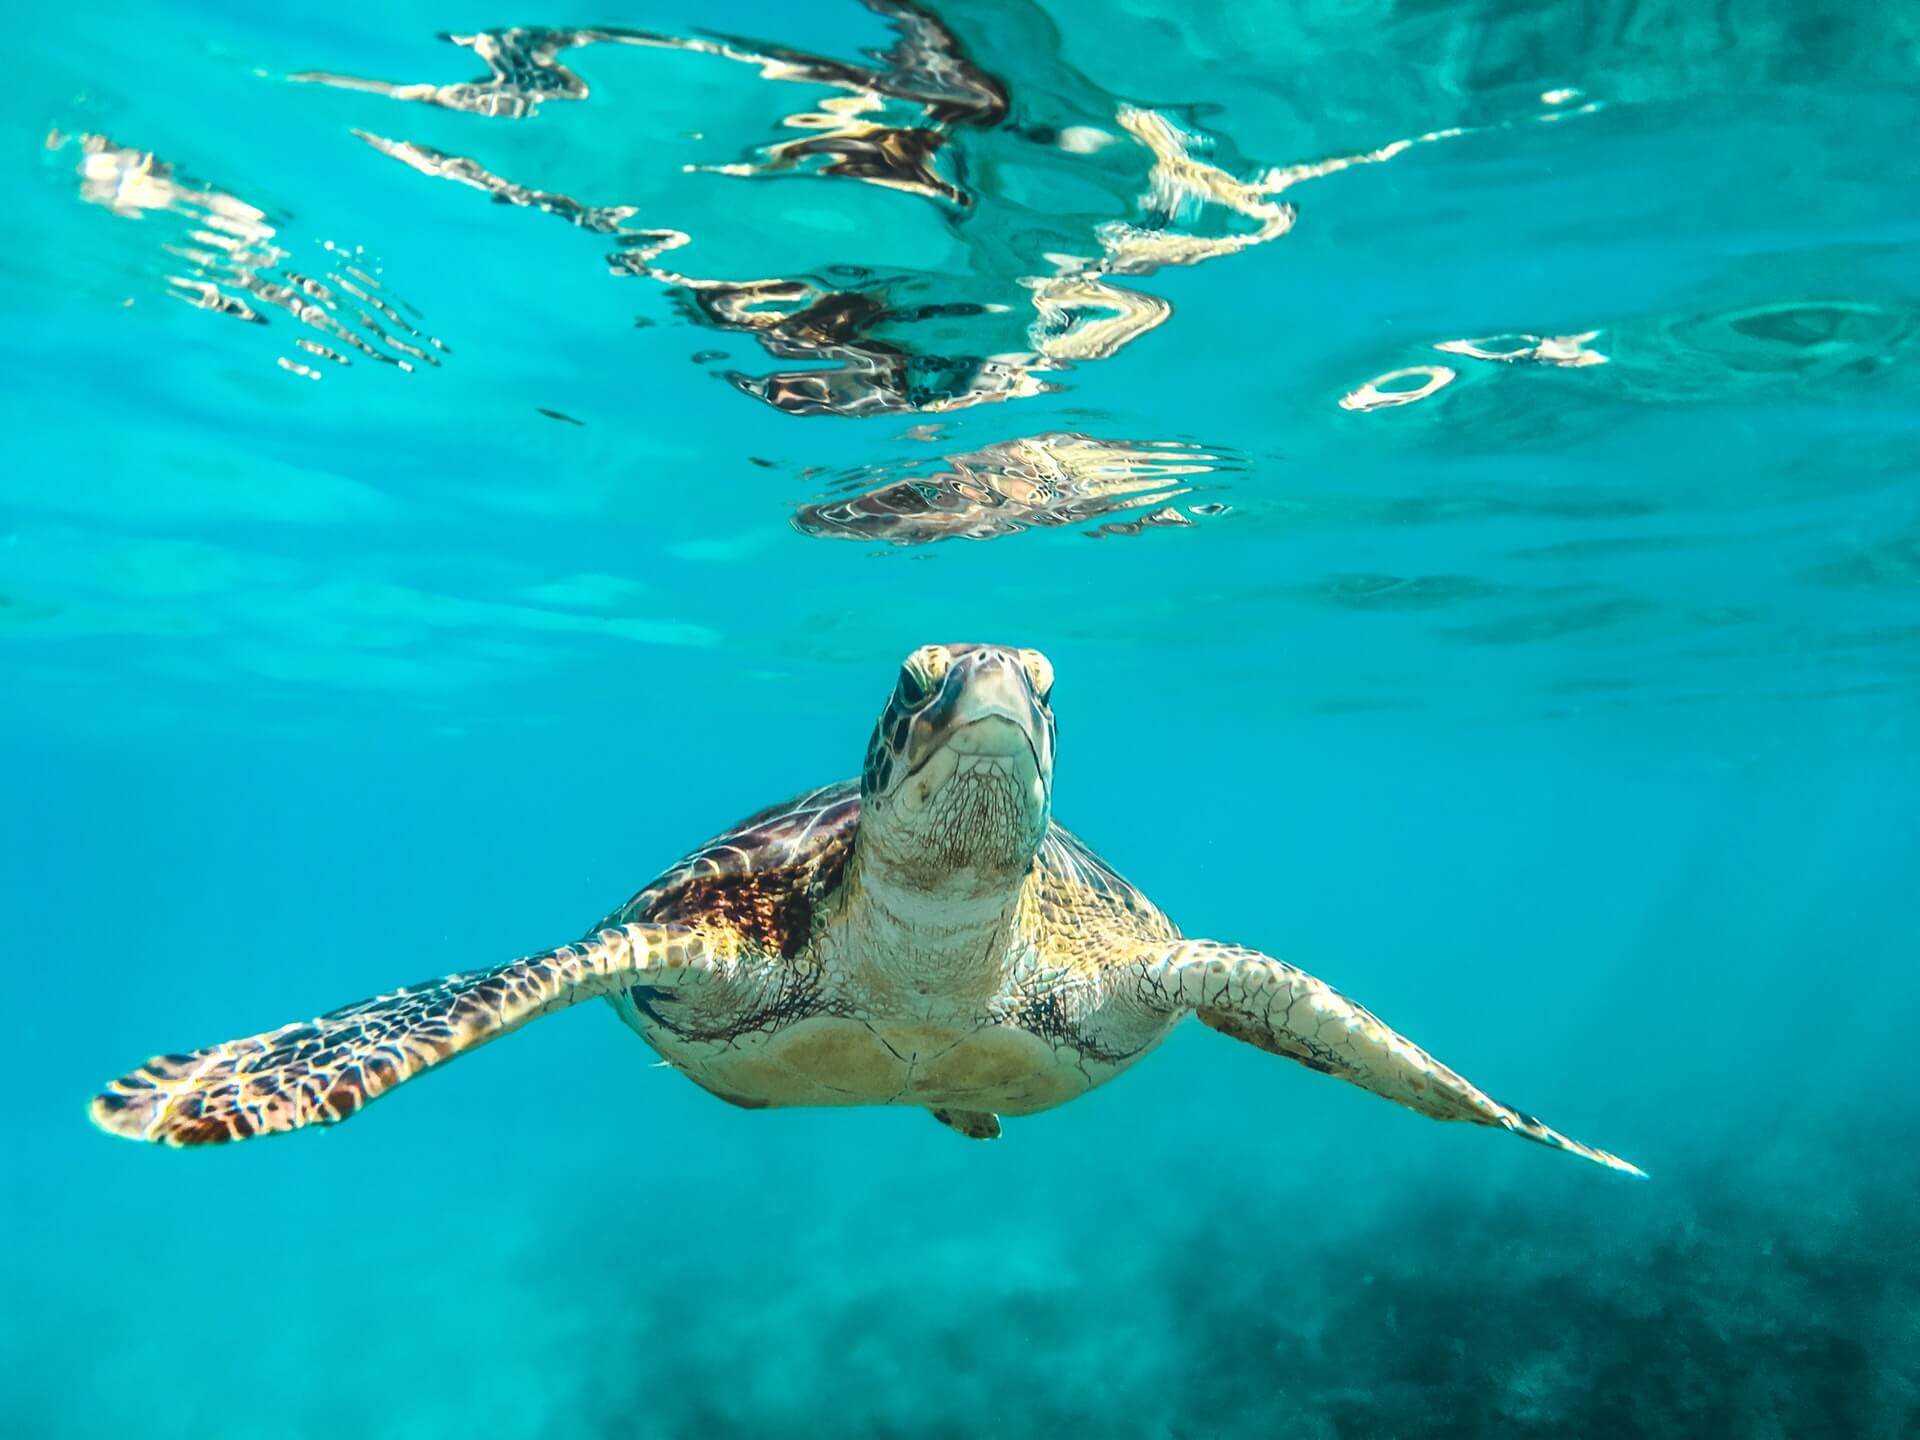 A photograph of a turtle taken by a diver living on a boat in the Caribbean.